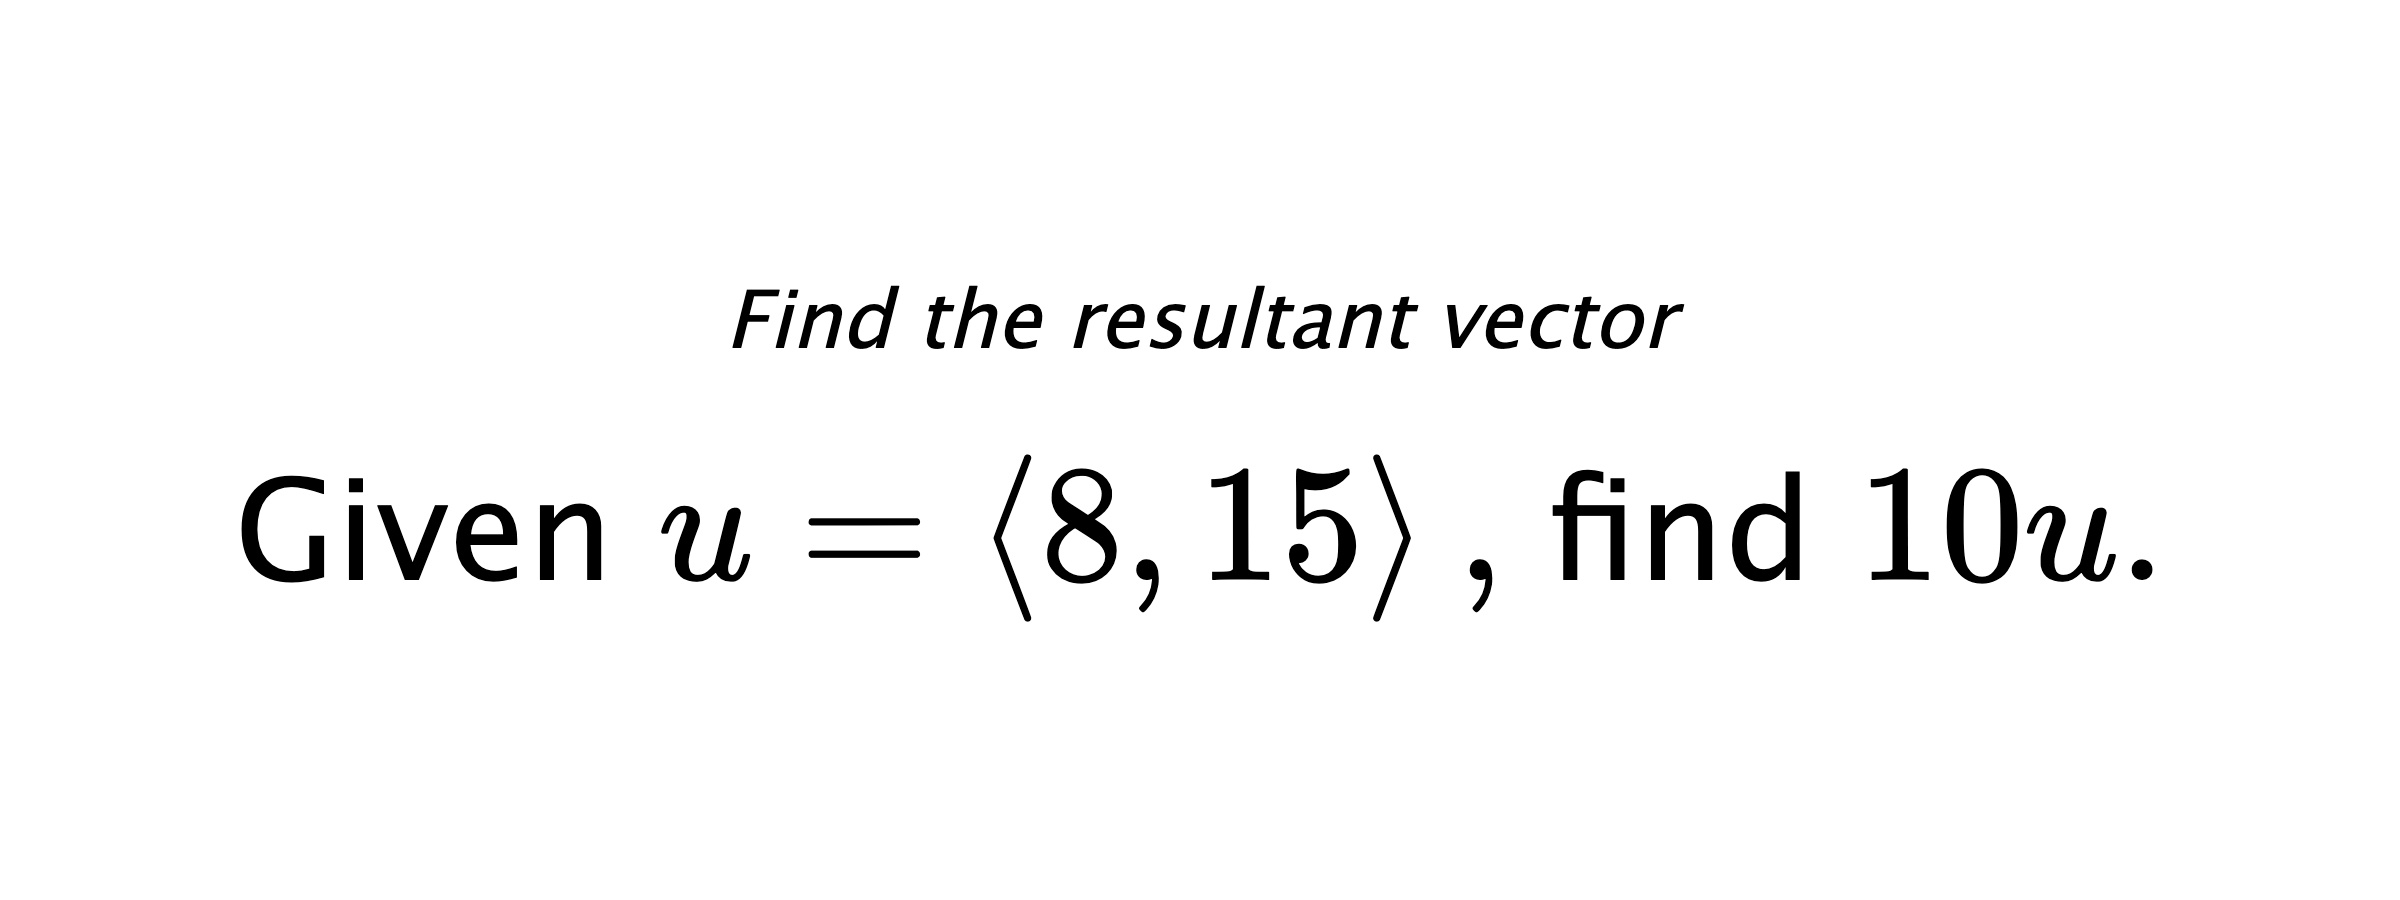 Find the resultant vector Given $ u = \left< 8,15 \right> ,$ find $ 10u .$